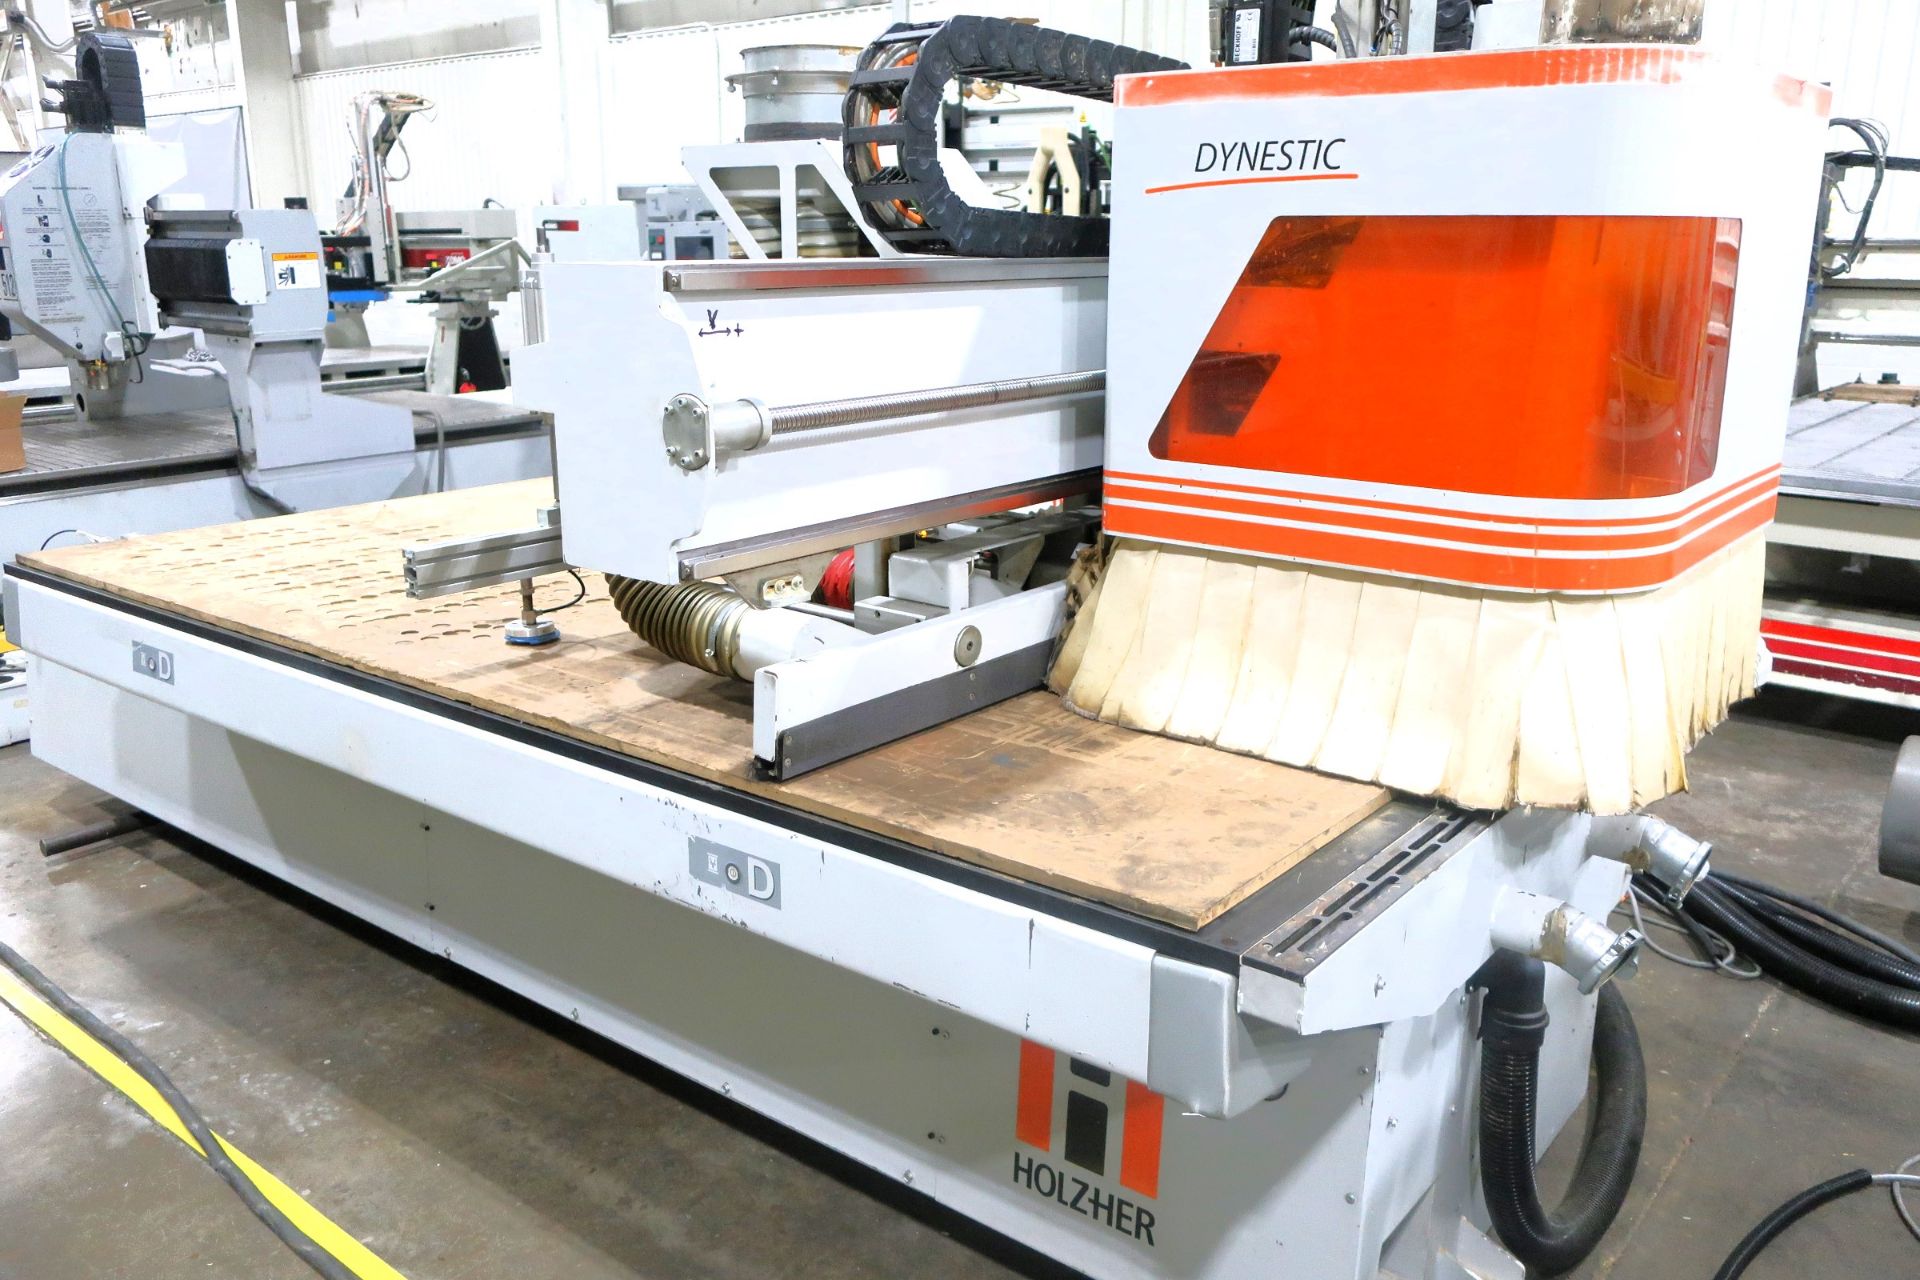 5' X 10' HOLZHER MODEL DYNESTIC 7516 CNC ROUTER, S/N 27/1-102 5017084, NEW 2011 - Image 3 of 16